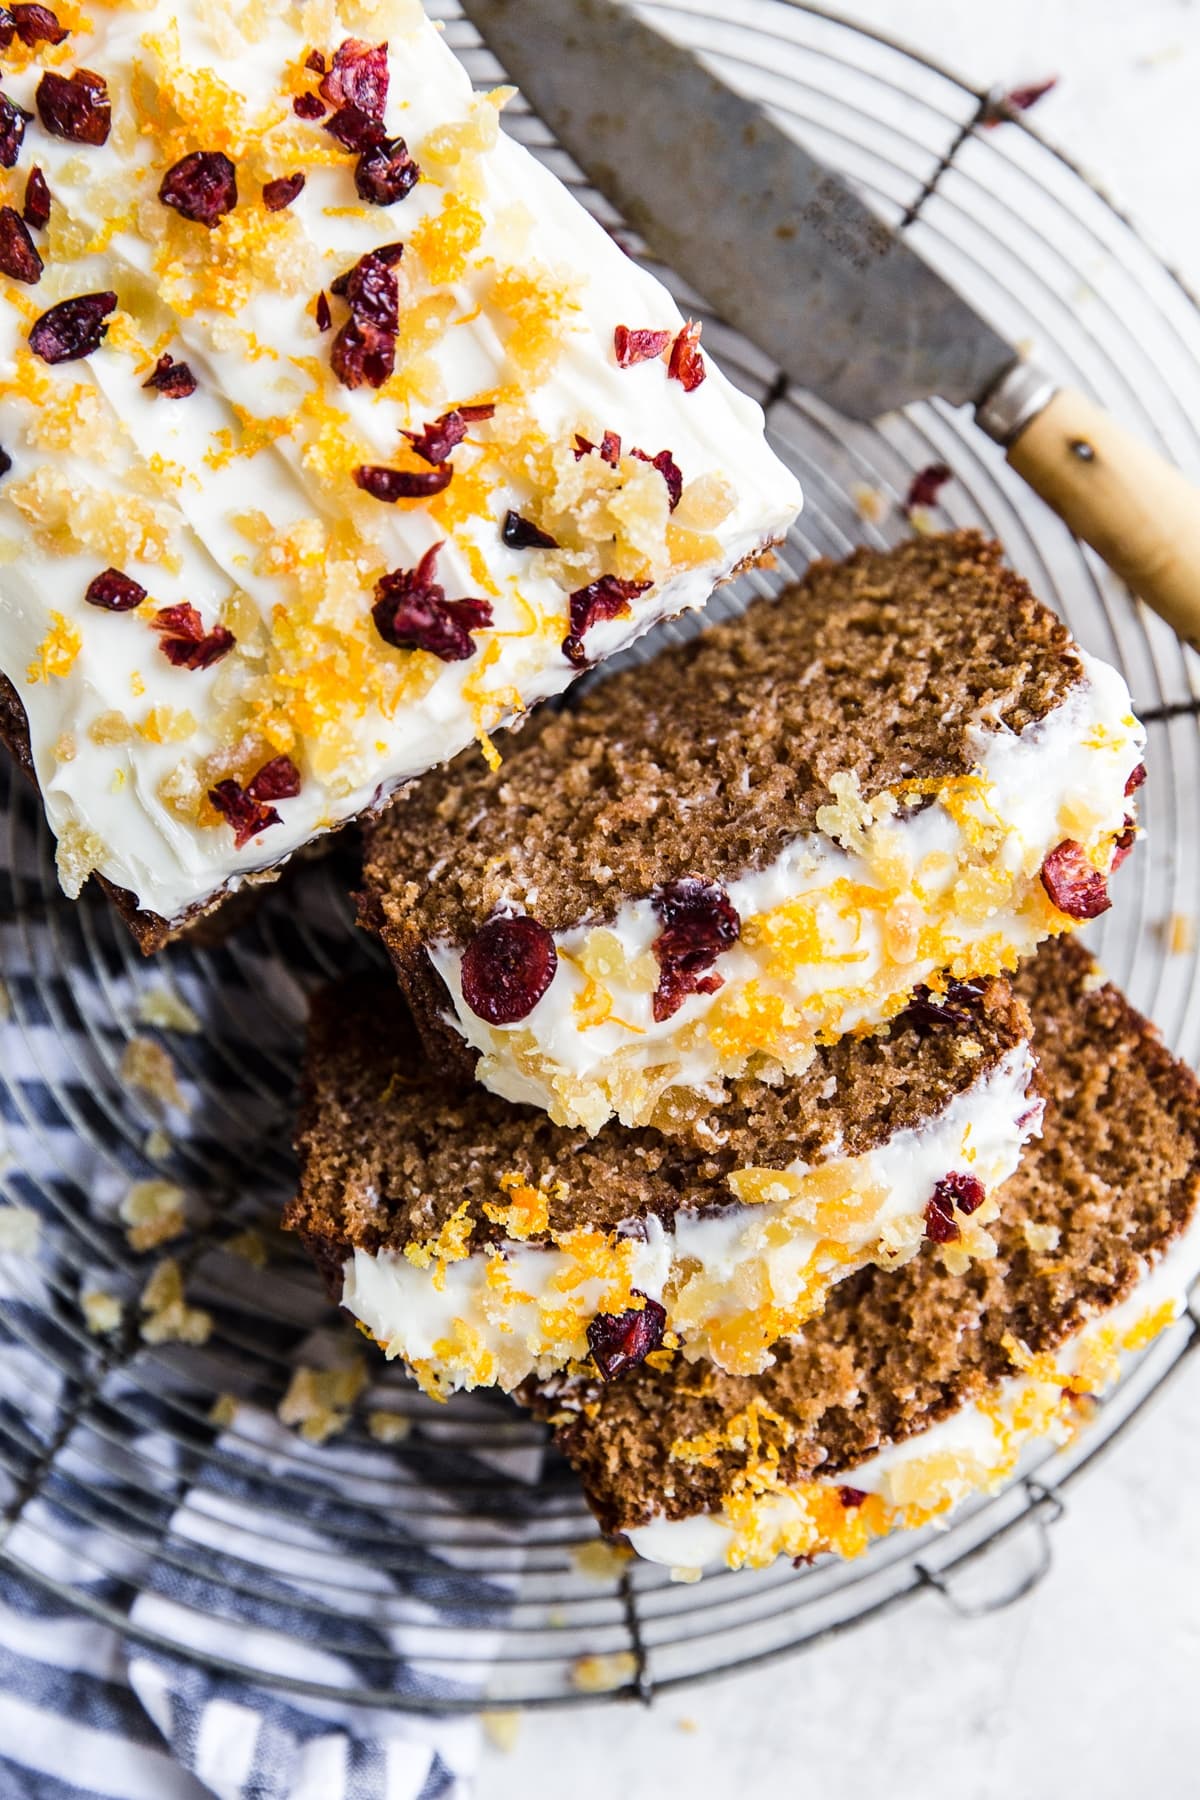 Gingerbread Loaf With Cream Cheese Icing orange zest, candied ginger and dried cranberries sliced on a cooling rack